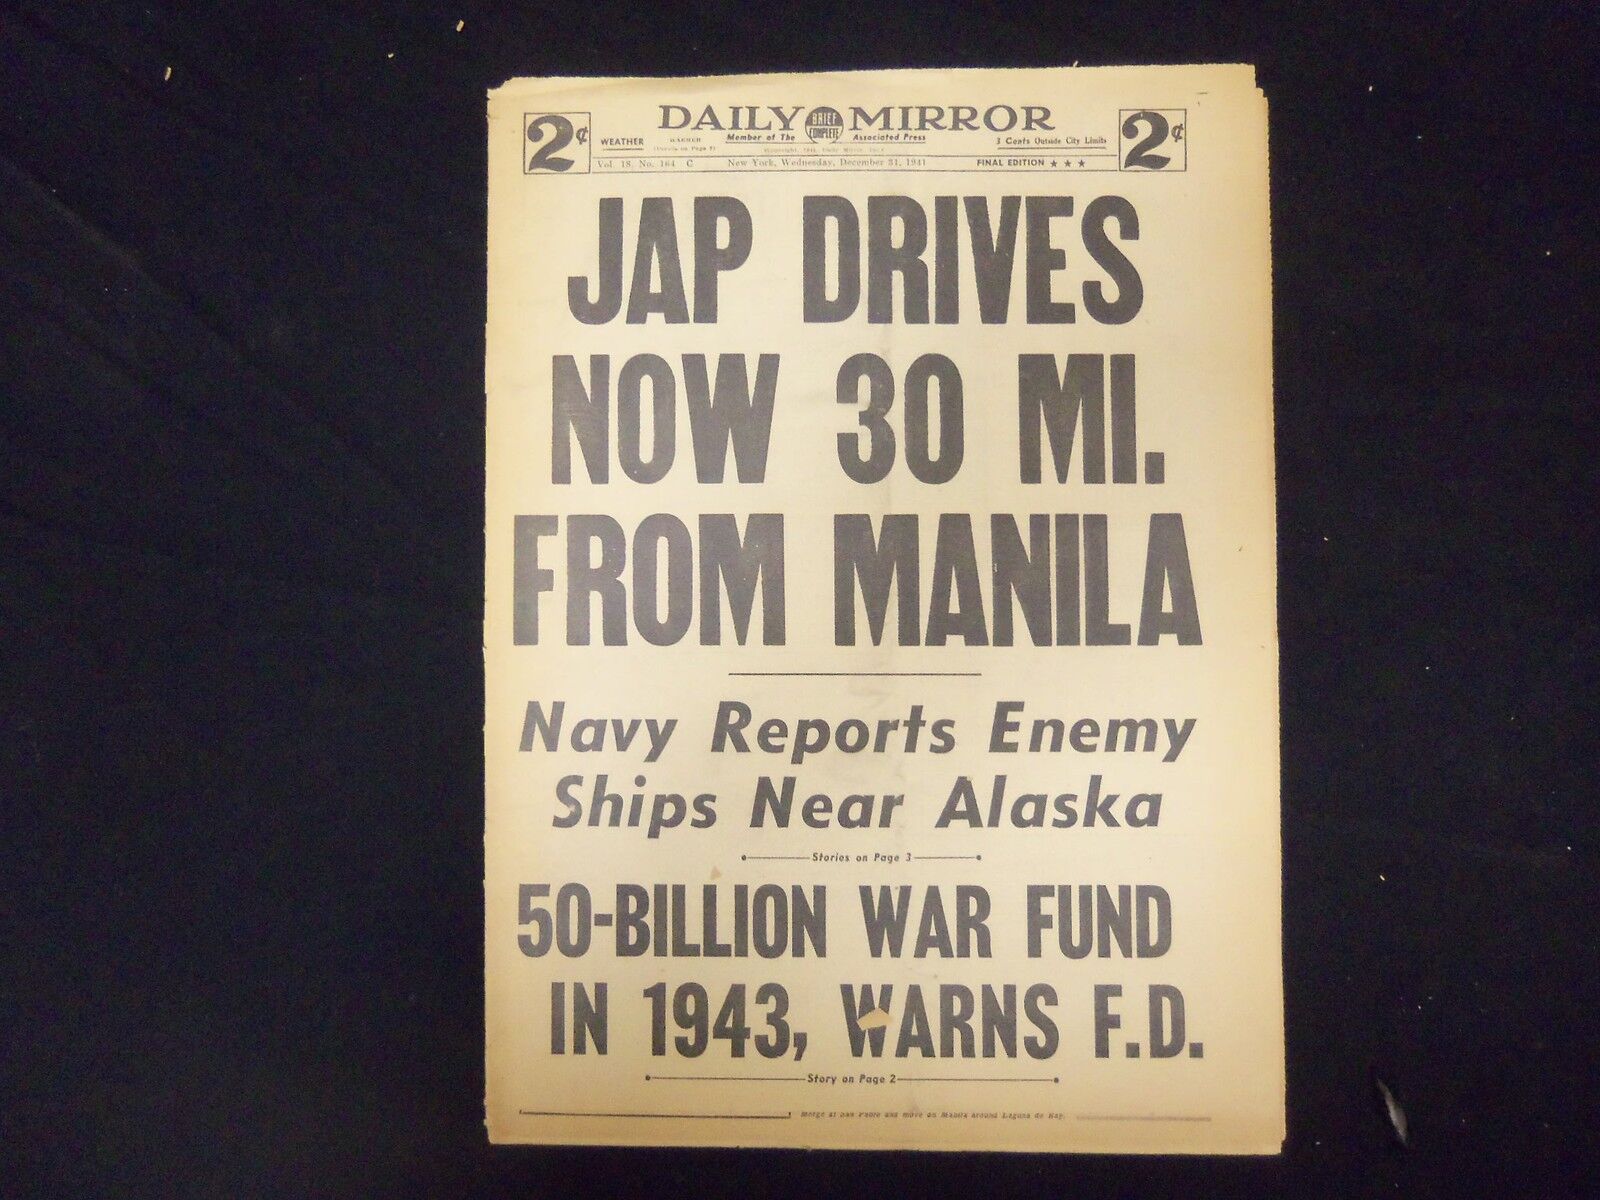 1941 DEC 31 NEW YORK DAILY MIRROR - JAP DRIVES NOW 30 MI. FROM MANILA - NP 2136